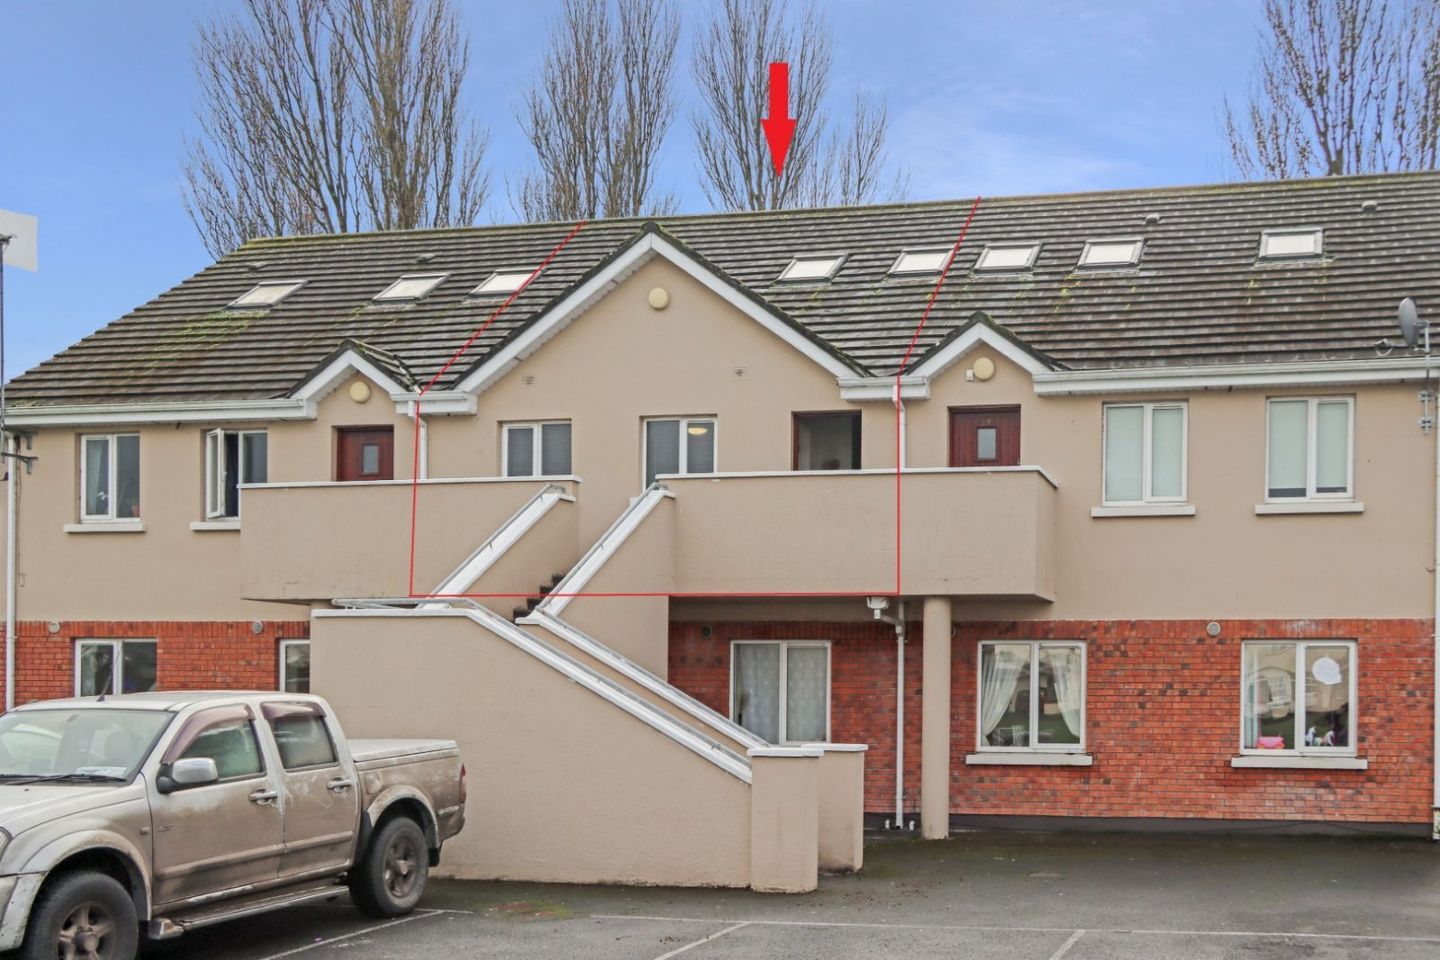 29, 29, Coole Haven, Gort, Co. Galway, H91WTV7